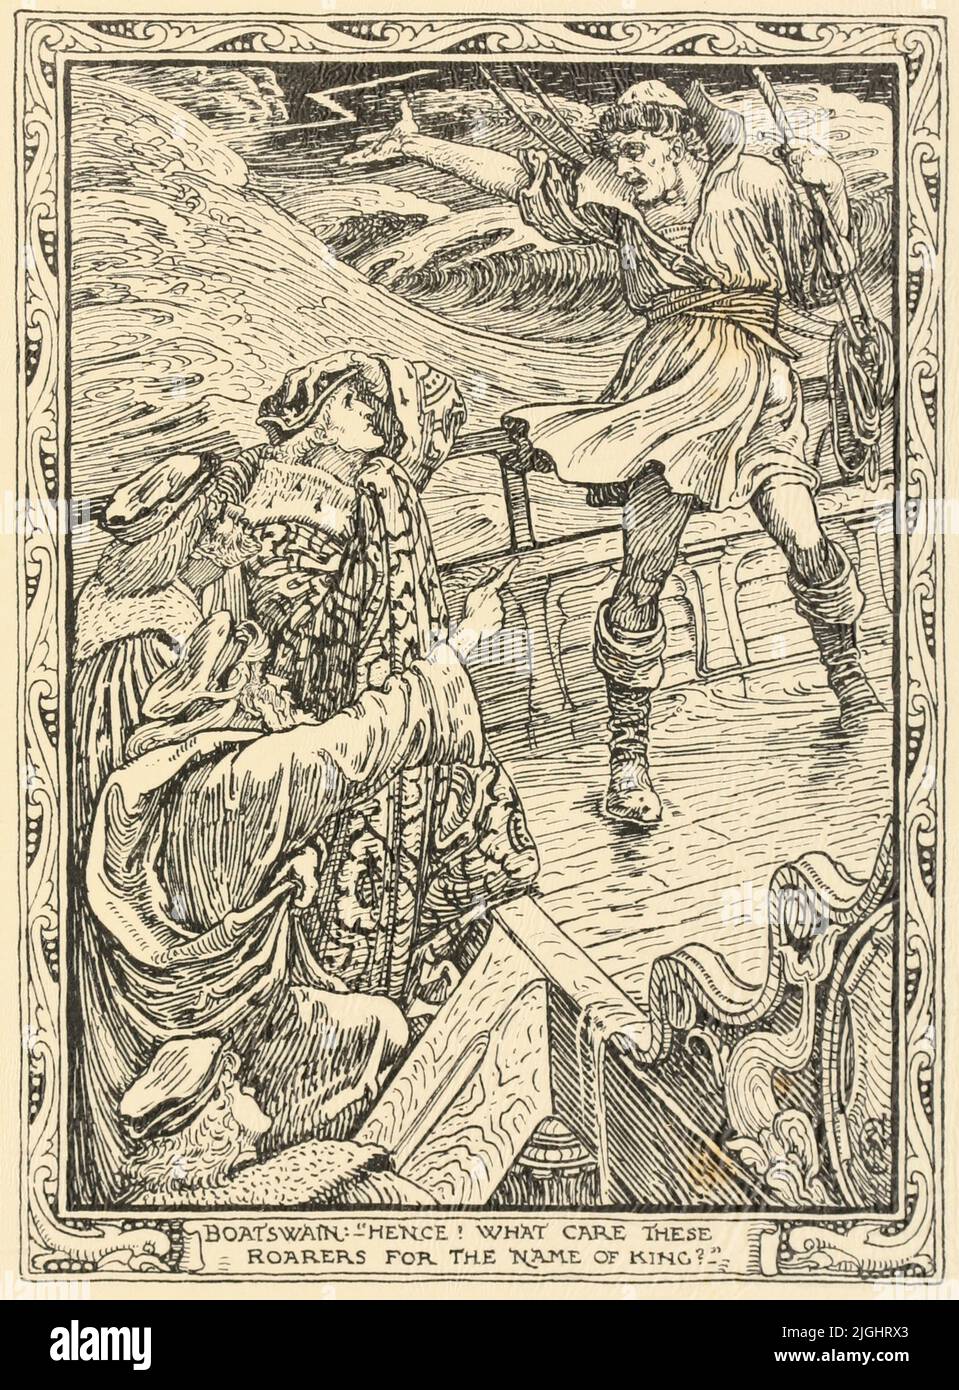 Boatswain - Hence ! what care these roarers for the name of king? [Act 1 Scene I] Illustrations to Shakespeare's Tempest by Walter Crane, 1845-1915; Engraved by Duncan C Dallas, Publication date 1894 Publisher London : J. M. Dent ; Boston : Copeland & Day Stock Photo